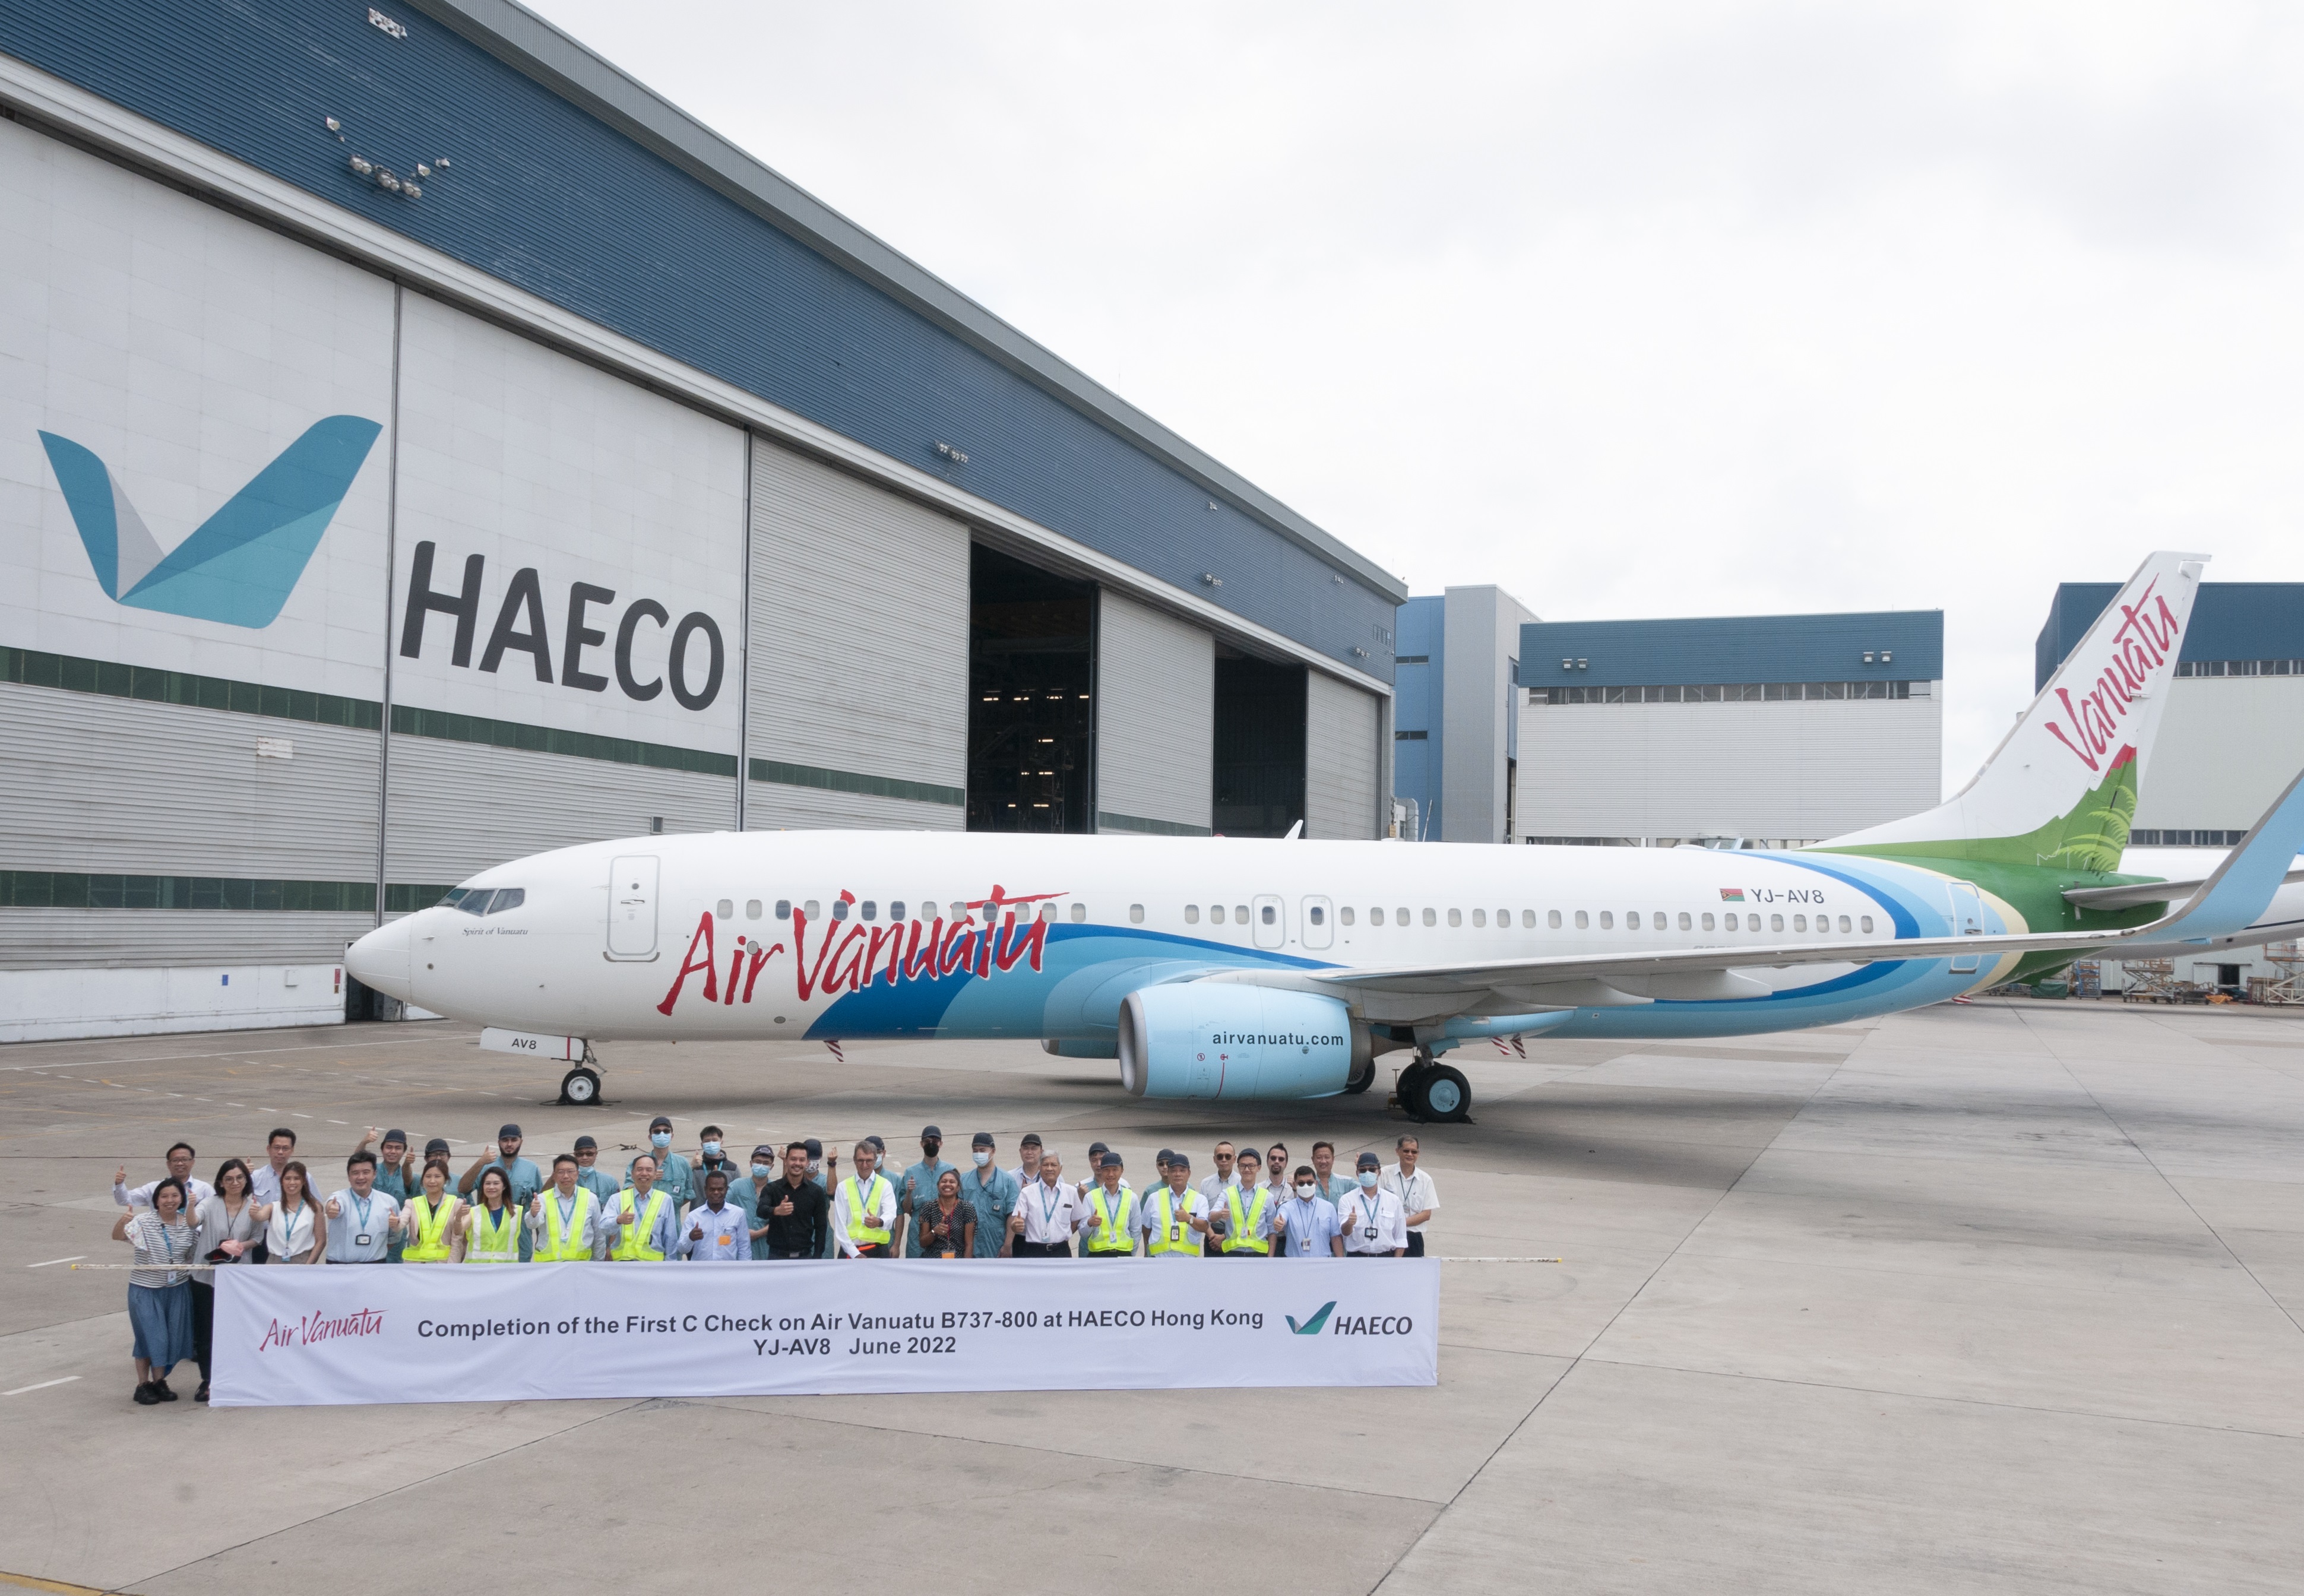 HAECO Hong Kong Completes First Boeing 737 C Check For Air Vanuatu